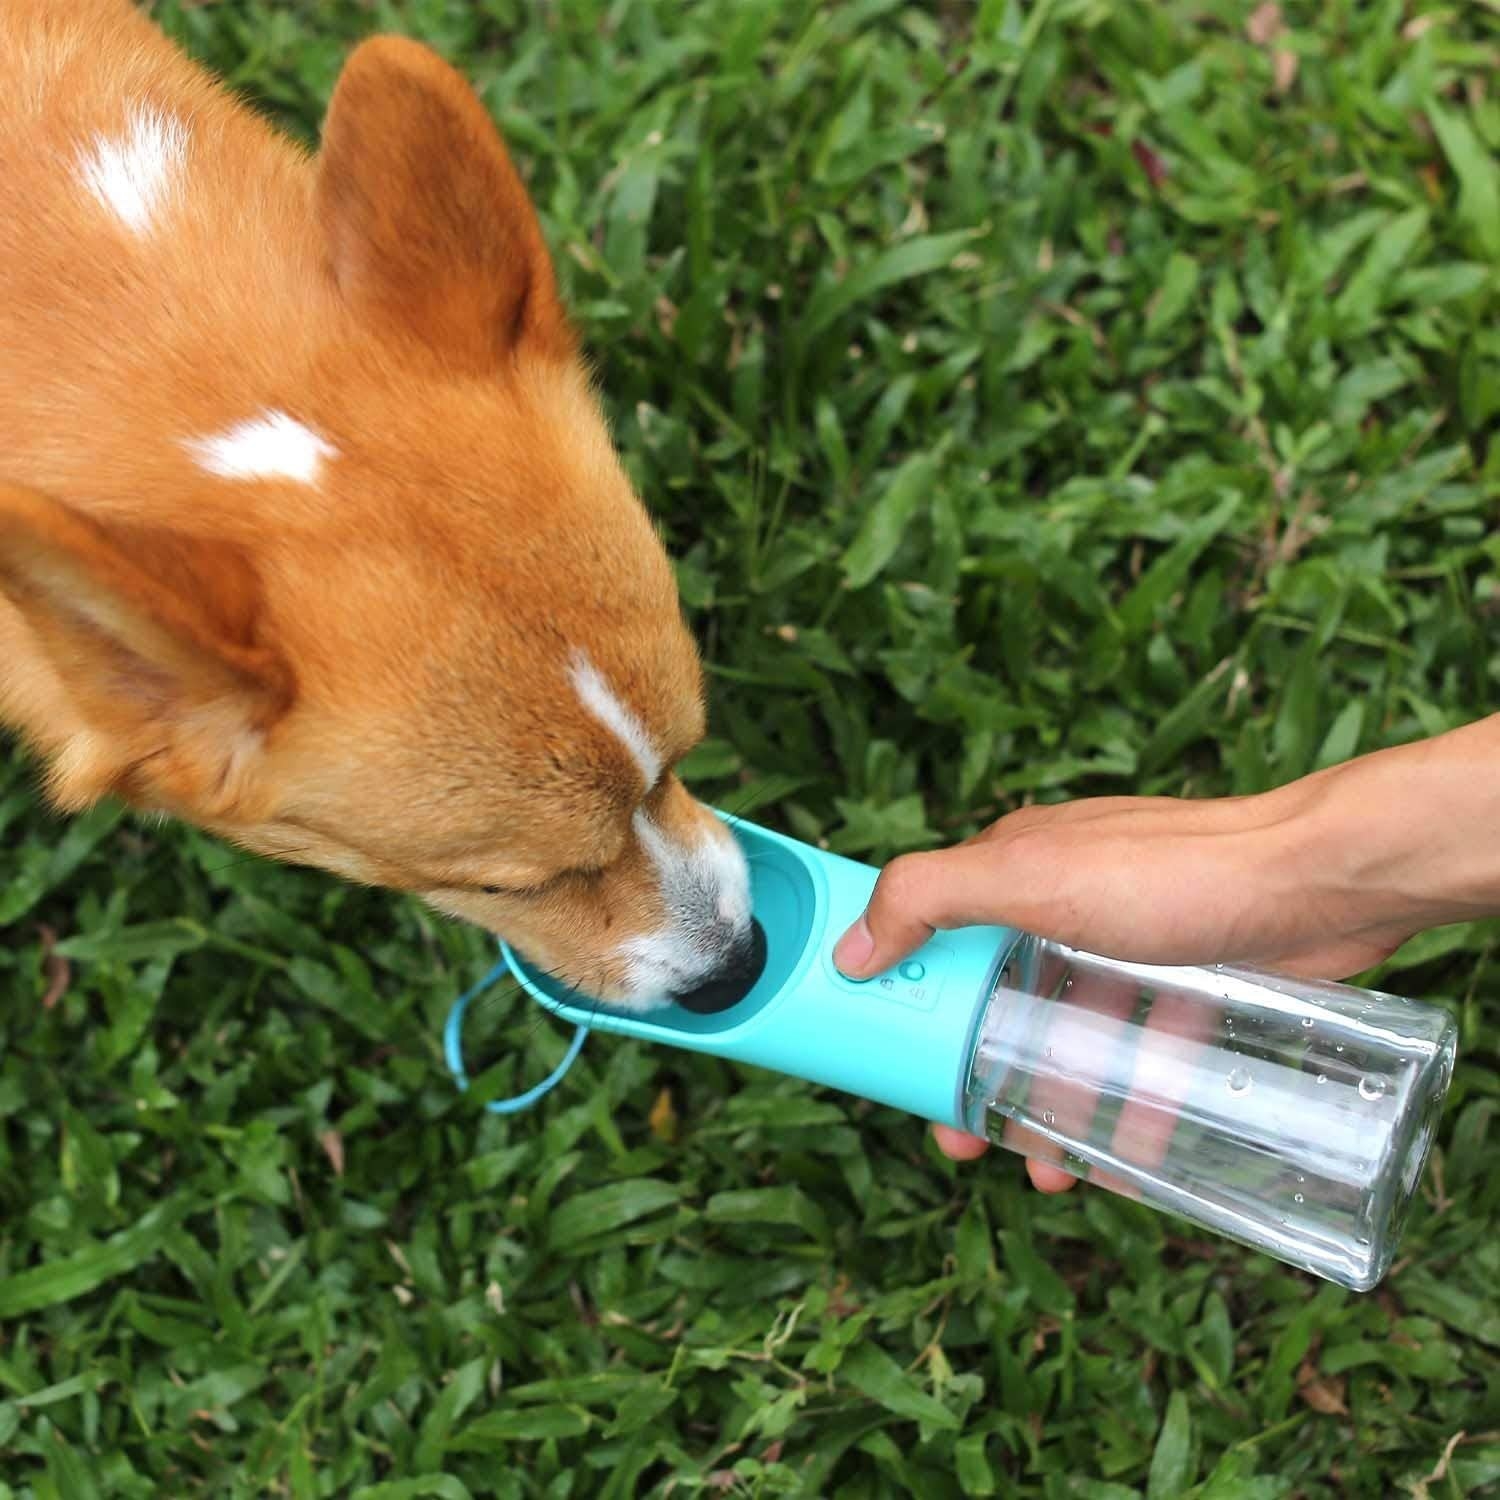 A dog drinking from the dog water bottle on a patch of grass